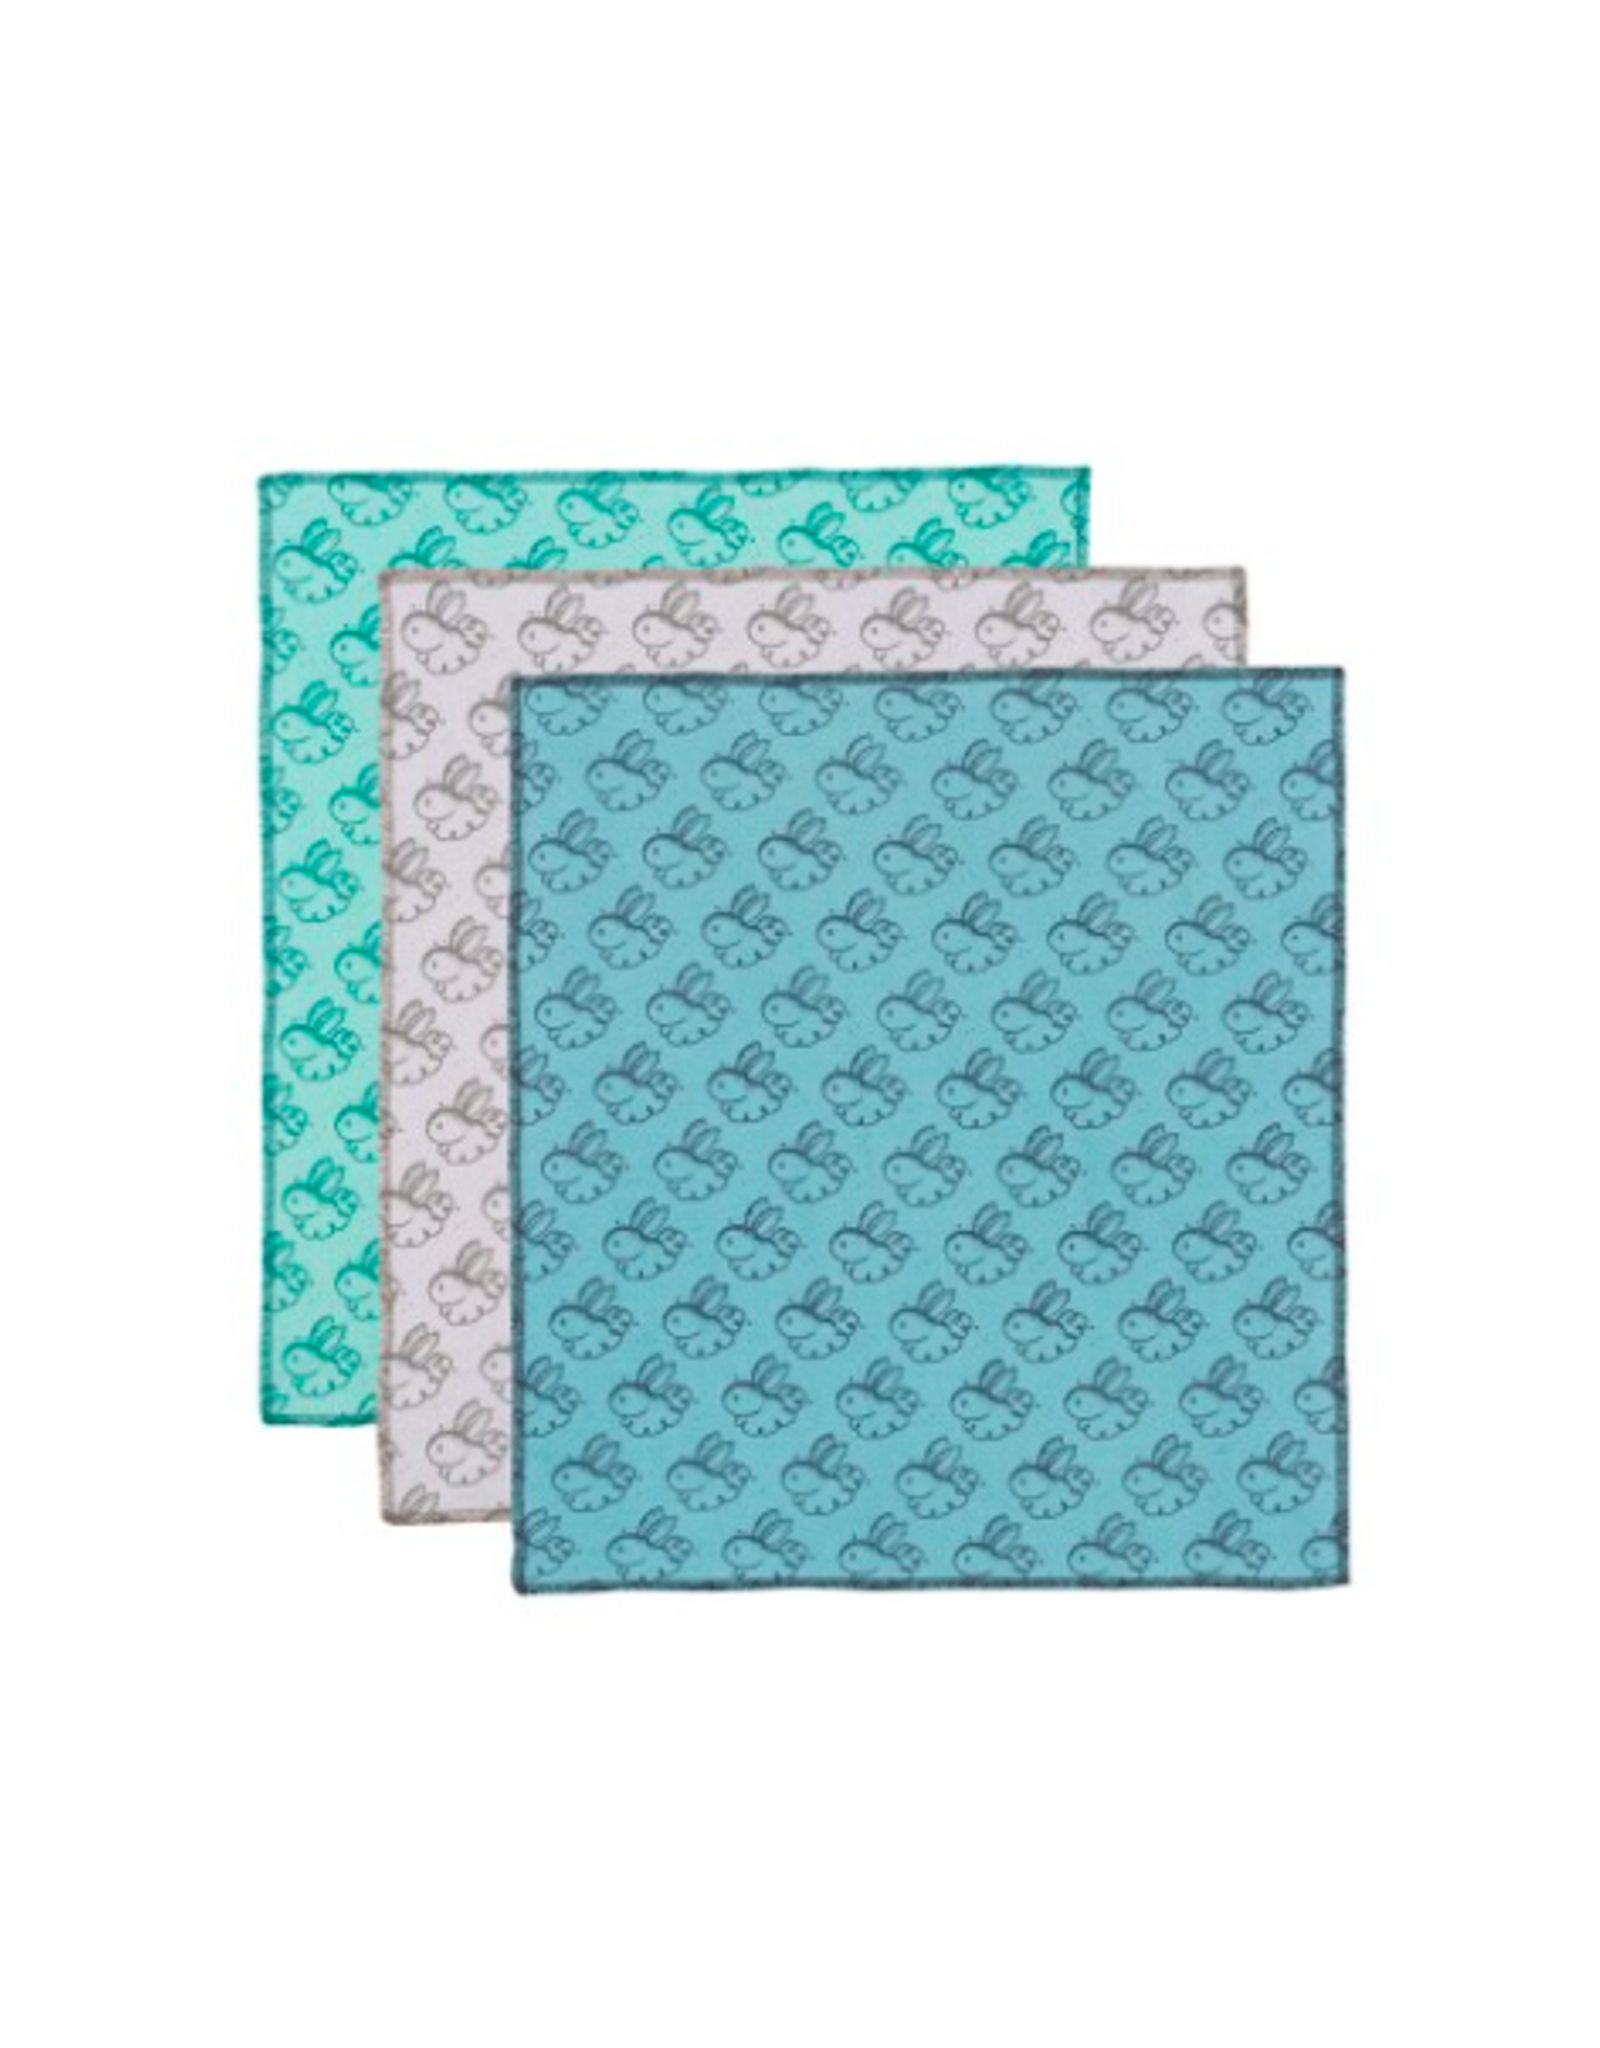 TIMCo DCA - Dusting Cloth / Set of 3, Dust Bunny